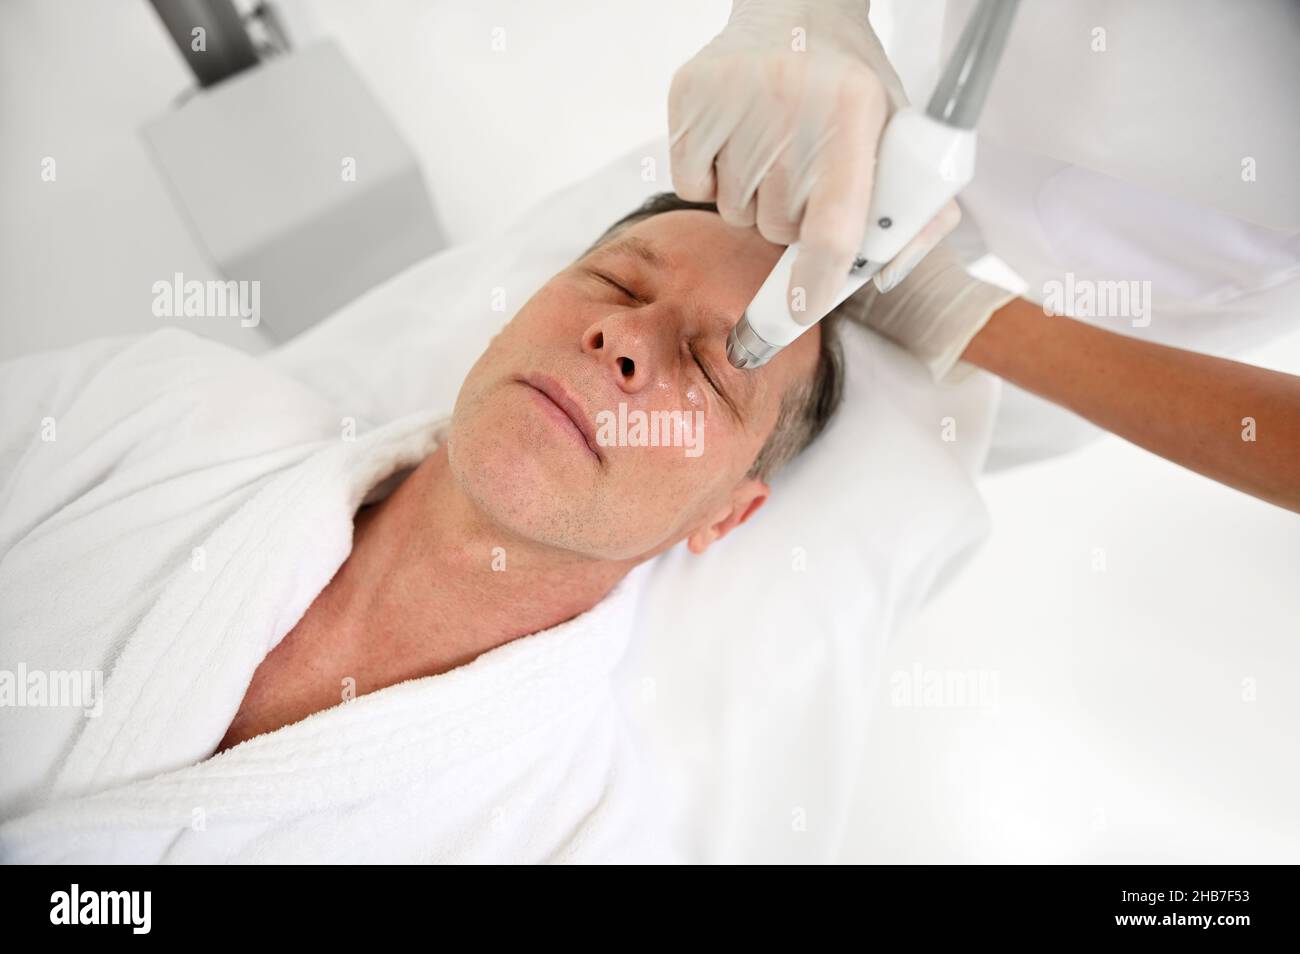 Rejuvenating facial treatment. Overhead view of mature man getting lifting therapy massage in wellness SPA clinic. Exfoliation, stimulation and hydrat Stock Photo